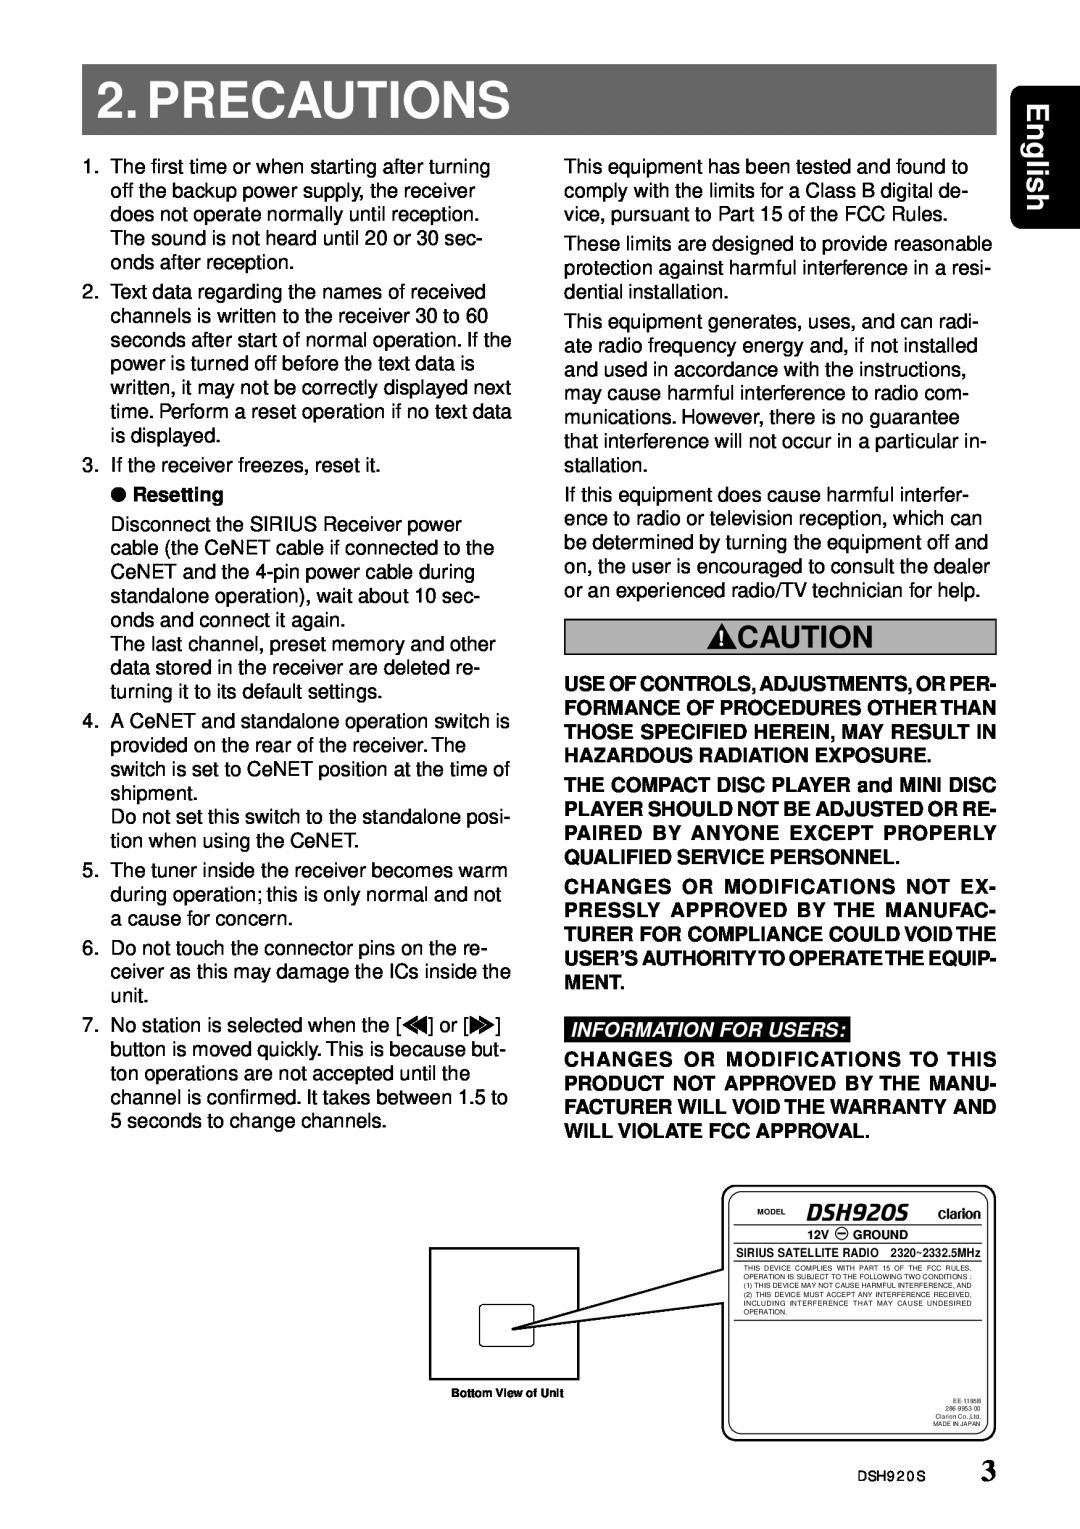 Clarion DSH920S owner manual Precautions, English, Information For Users 